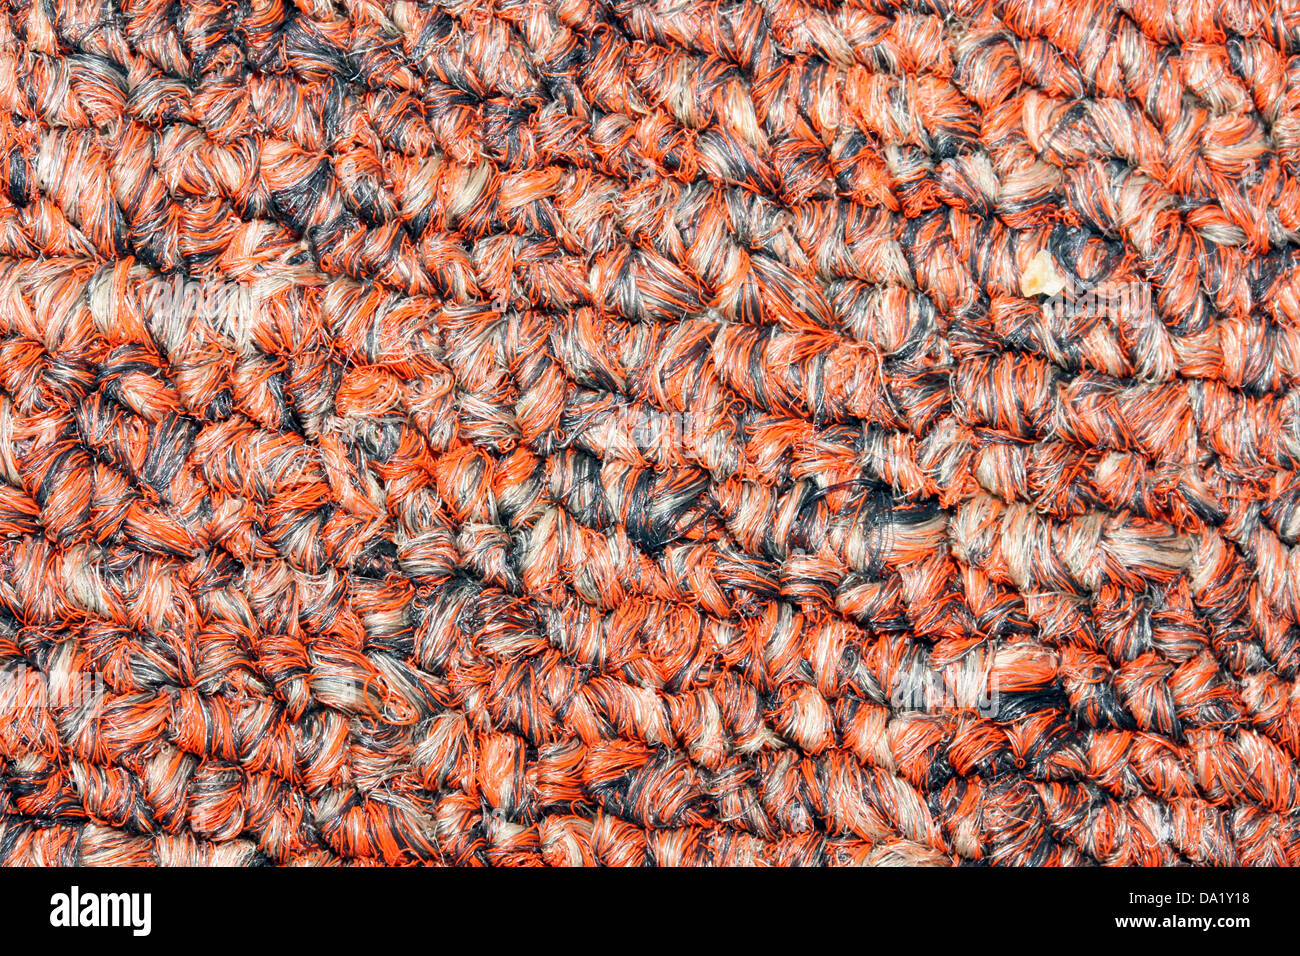 This is a closeup shot of some carpet, like nice background, pattern or textures Stock Photo